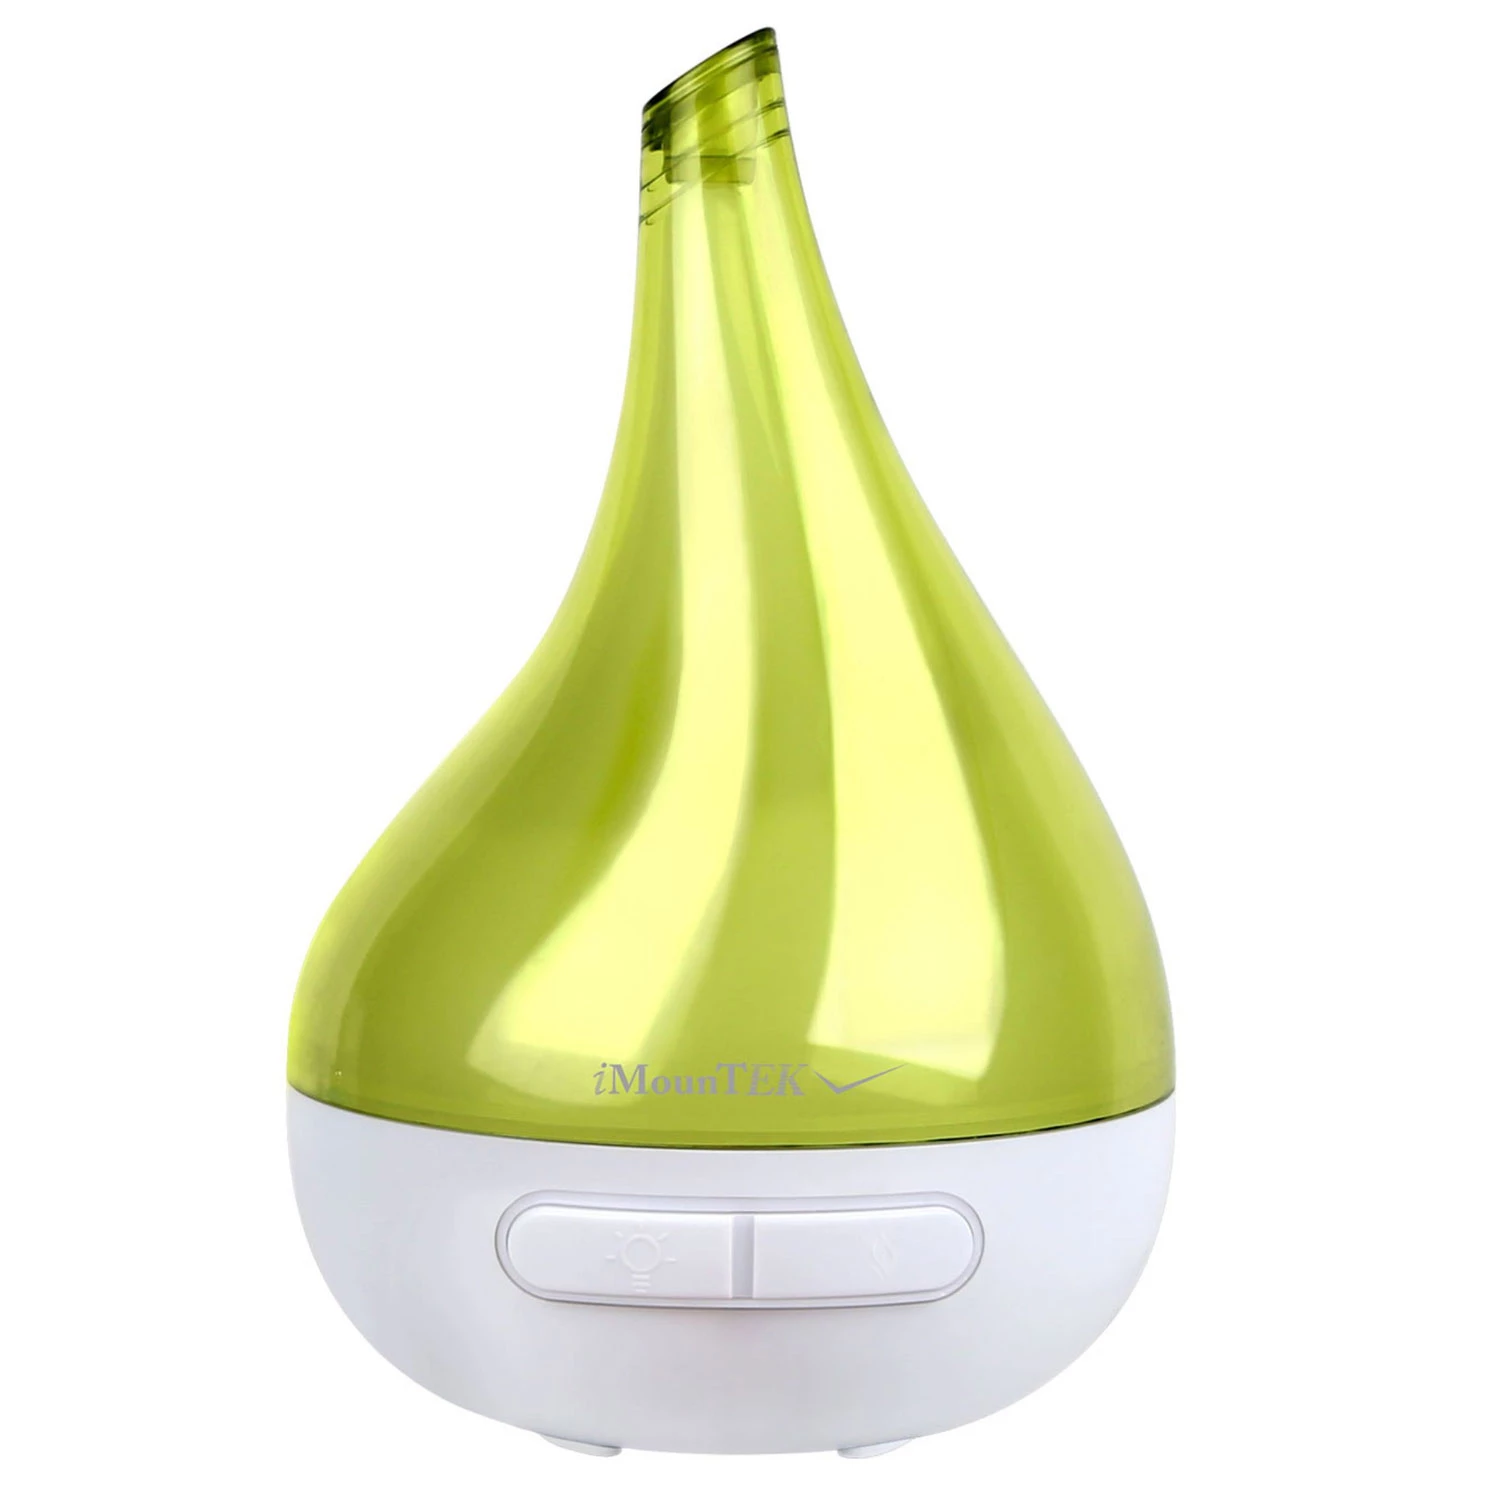 Cool Mist Humidifier And Aroma Diffuser with LED Light - Perfect for Office, Home, Vehicle, Study, Y